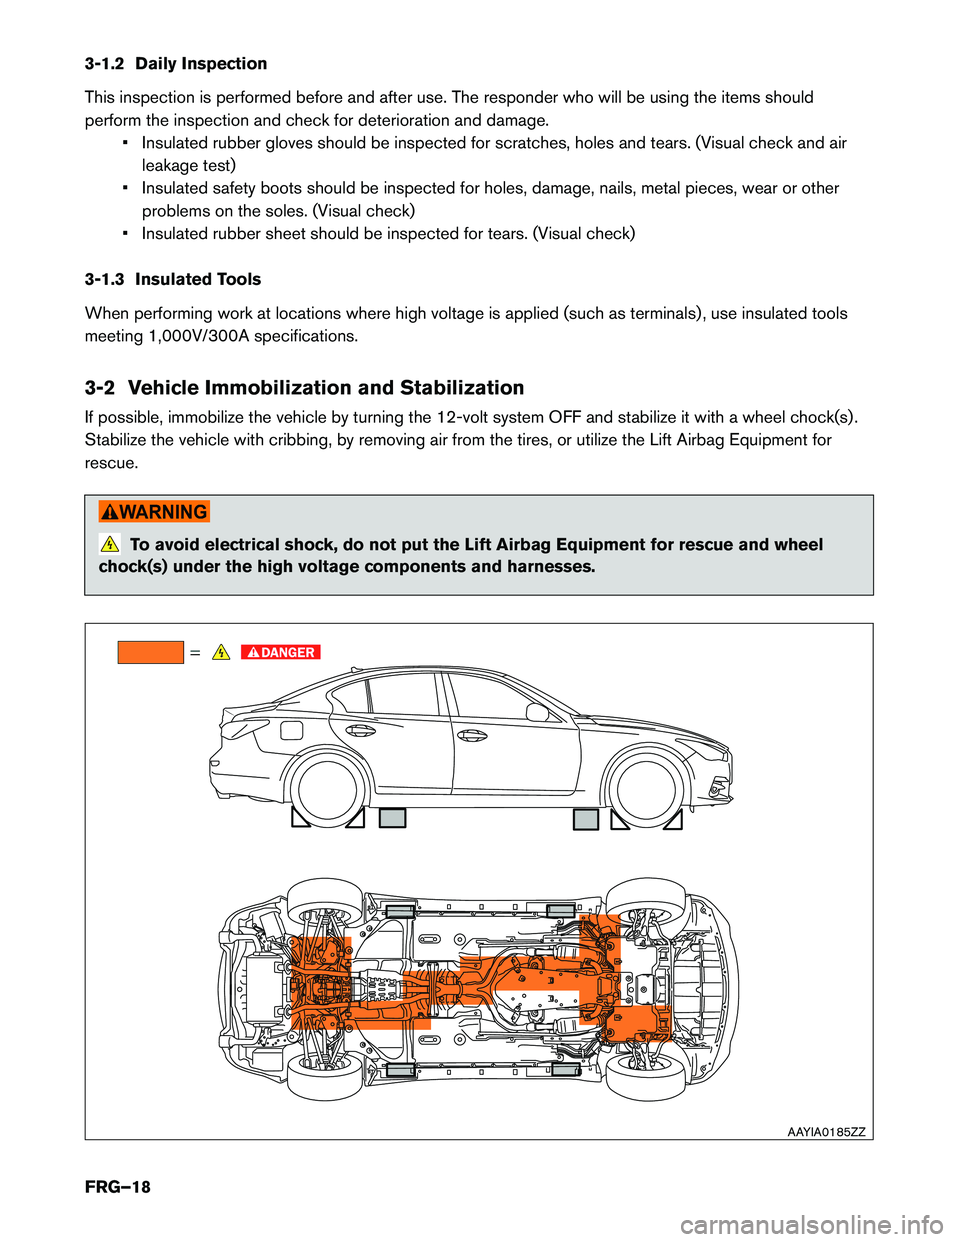 INFINITI Q50 HYBRID 2015  First responder´s Guide 3-1.2 Daily Inspection 
This inspection is performed before and after use. The responder who will be using the items should 
perform the inspection and check for deterioration and damage.• Insulated